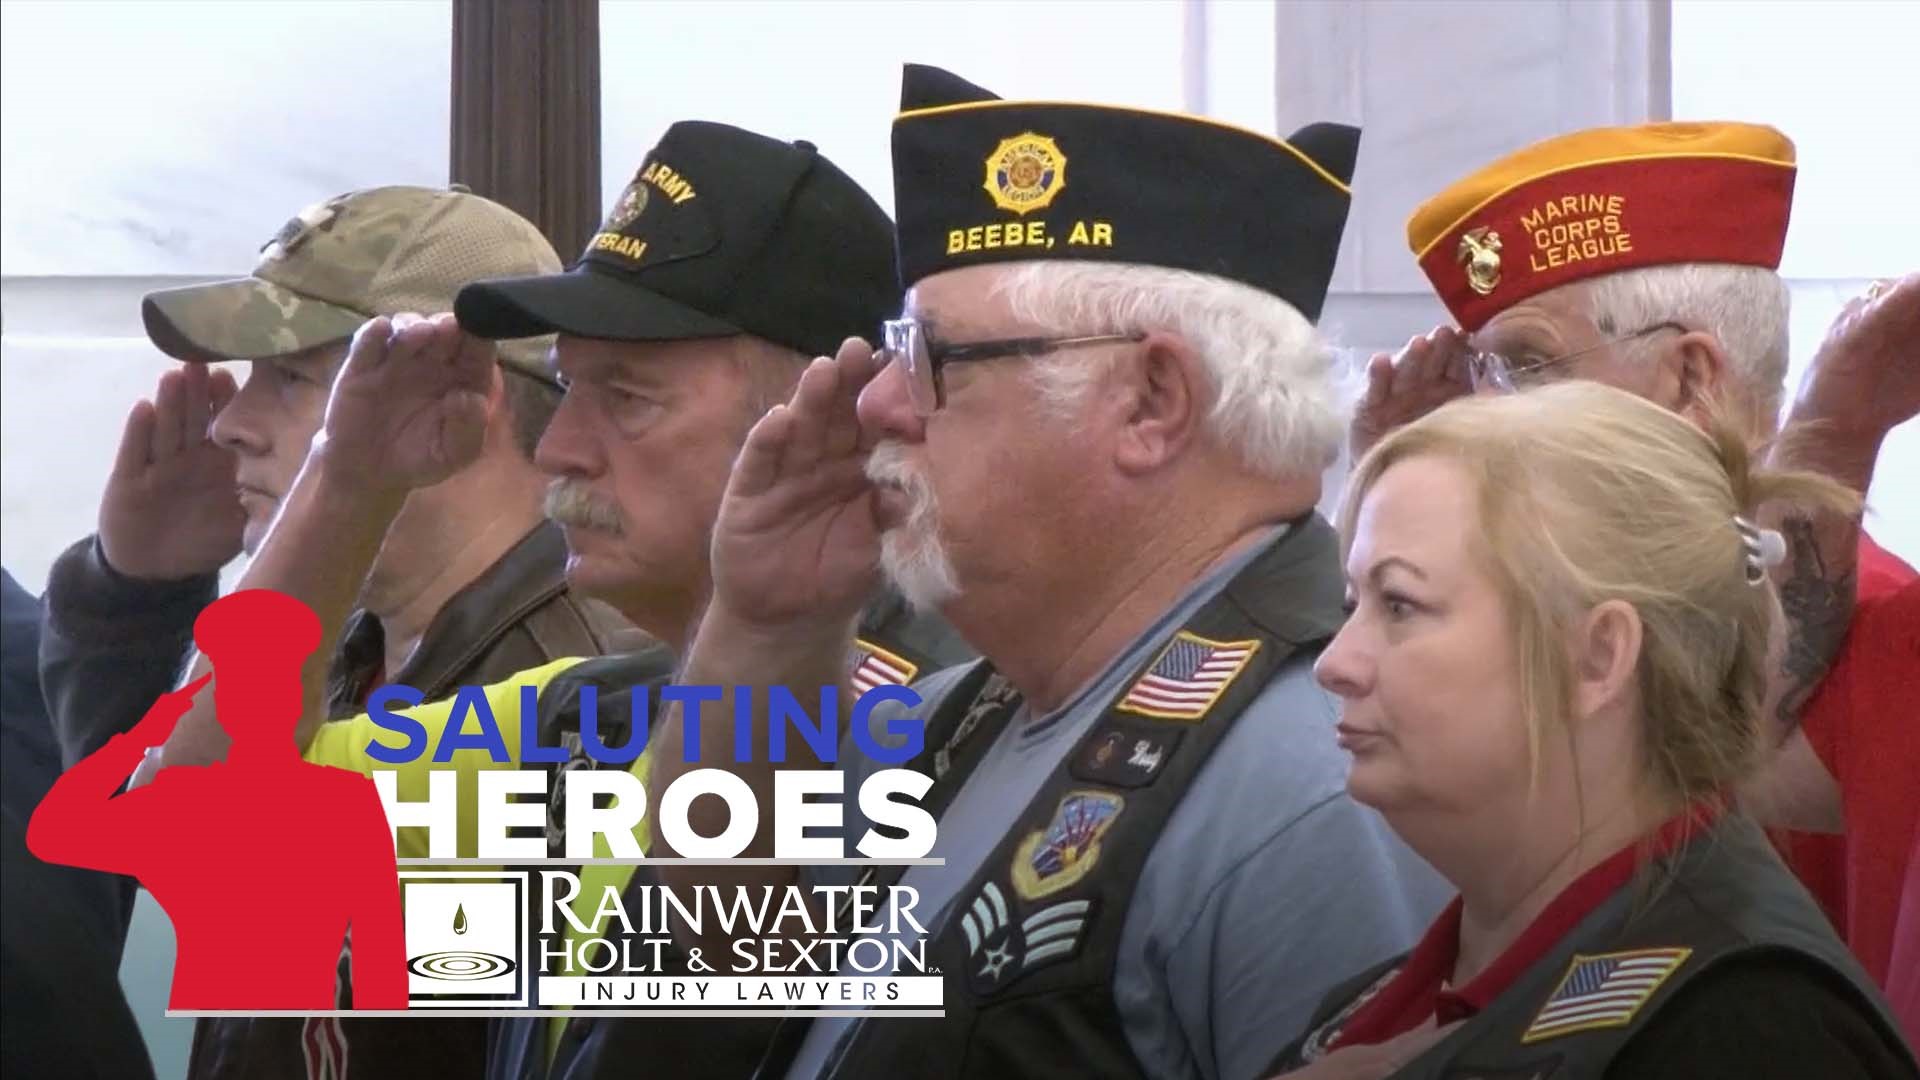 "Hearts of our Heroes" is a new non-profit aiming to make sure that fallen heroes are never forgotten and that their families are always supported.